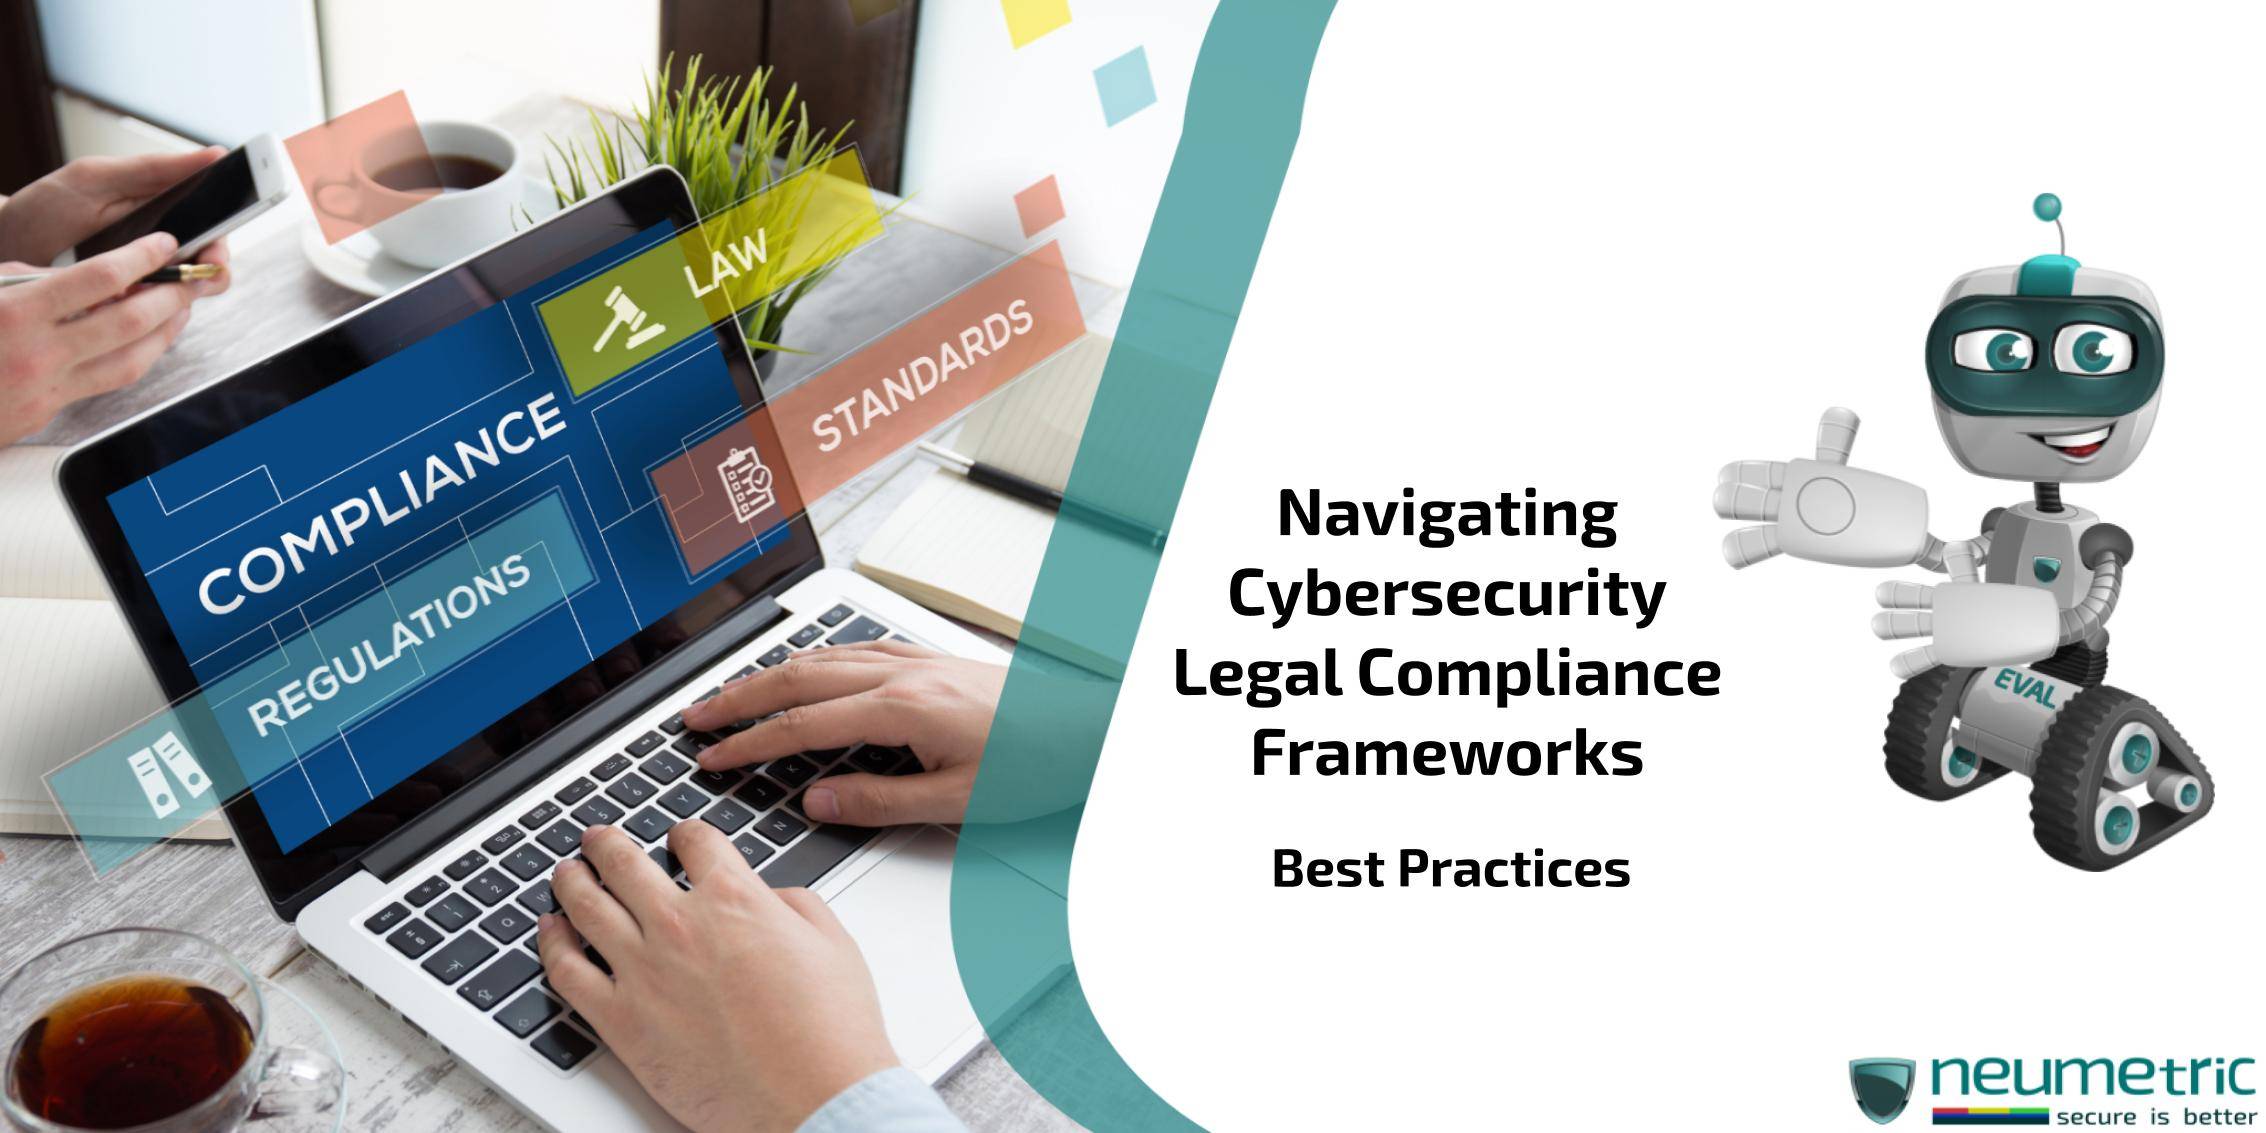 Navigating Cybersecurity Legal Compliance Frameworks: Best Practices